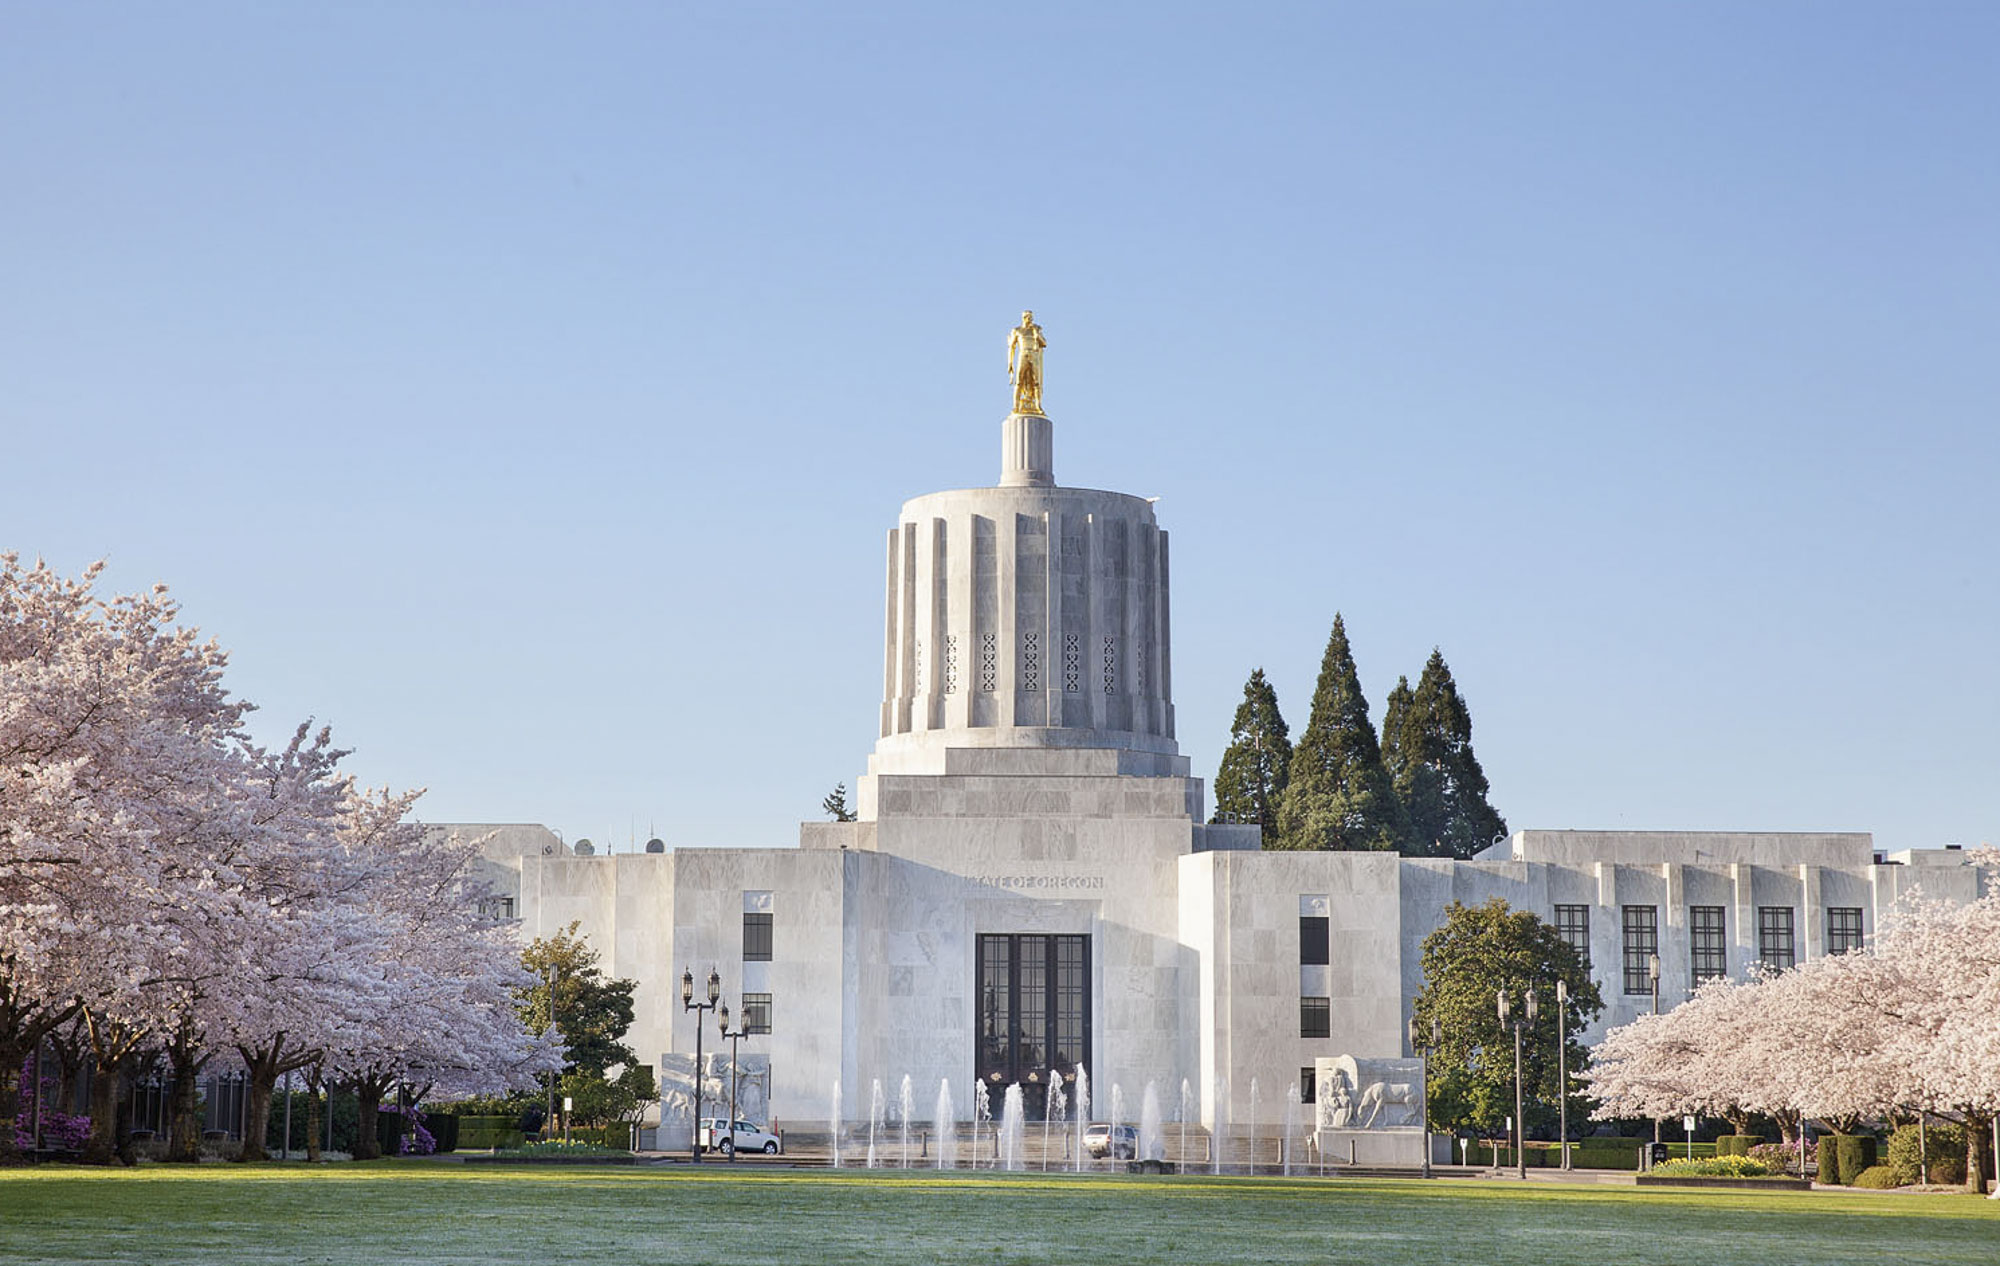 Salem Oregon State Capitol Building with Flowering Cherry Blossom Trees in Spring Season